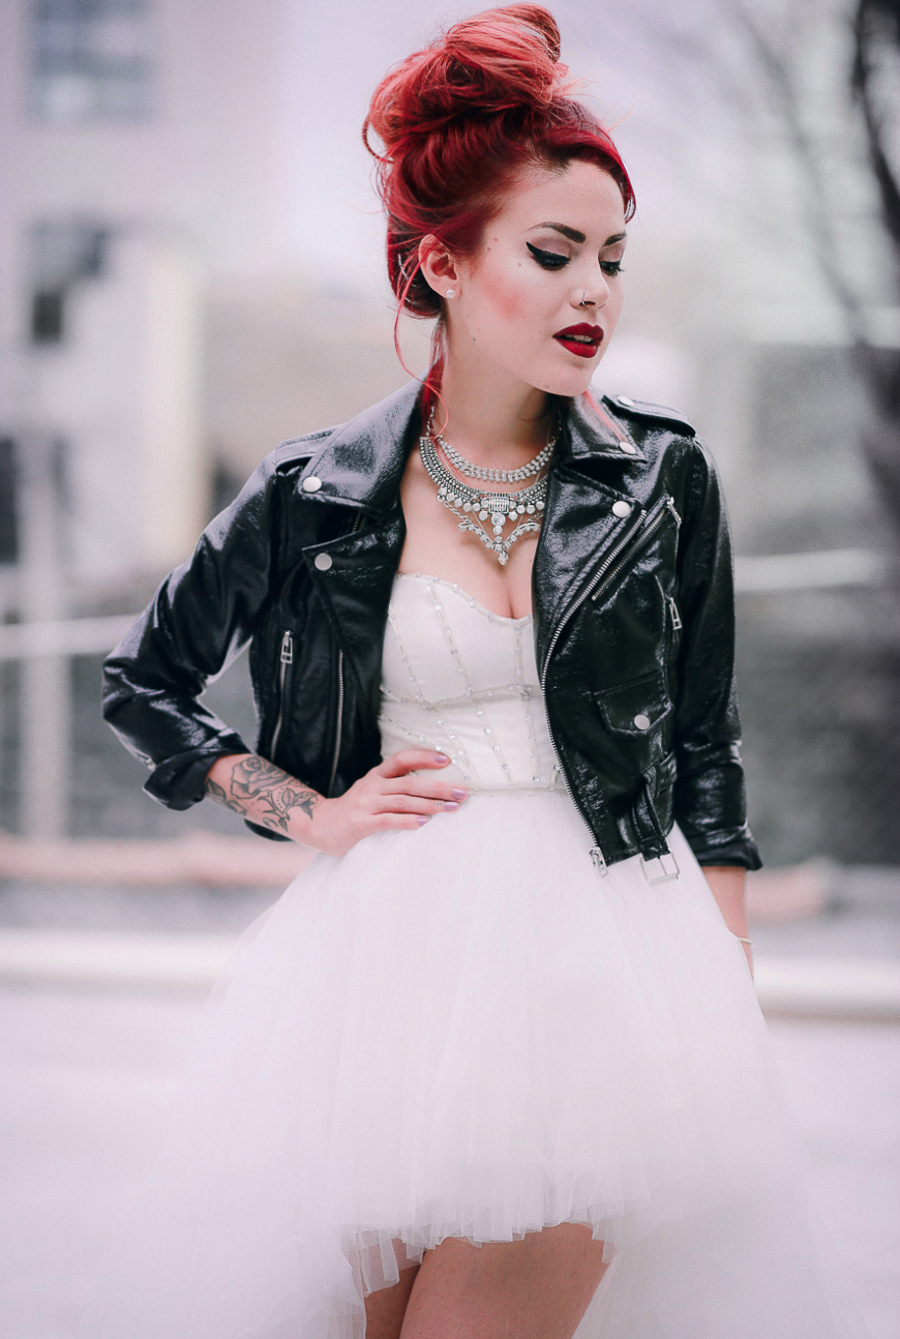 Le Happy wearing Nasty Gal Prom tulle dress and moto jacket